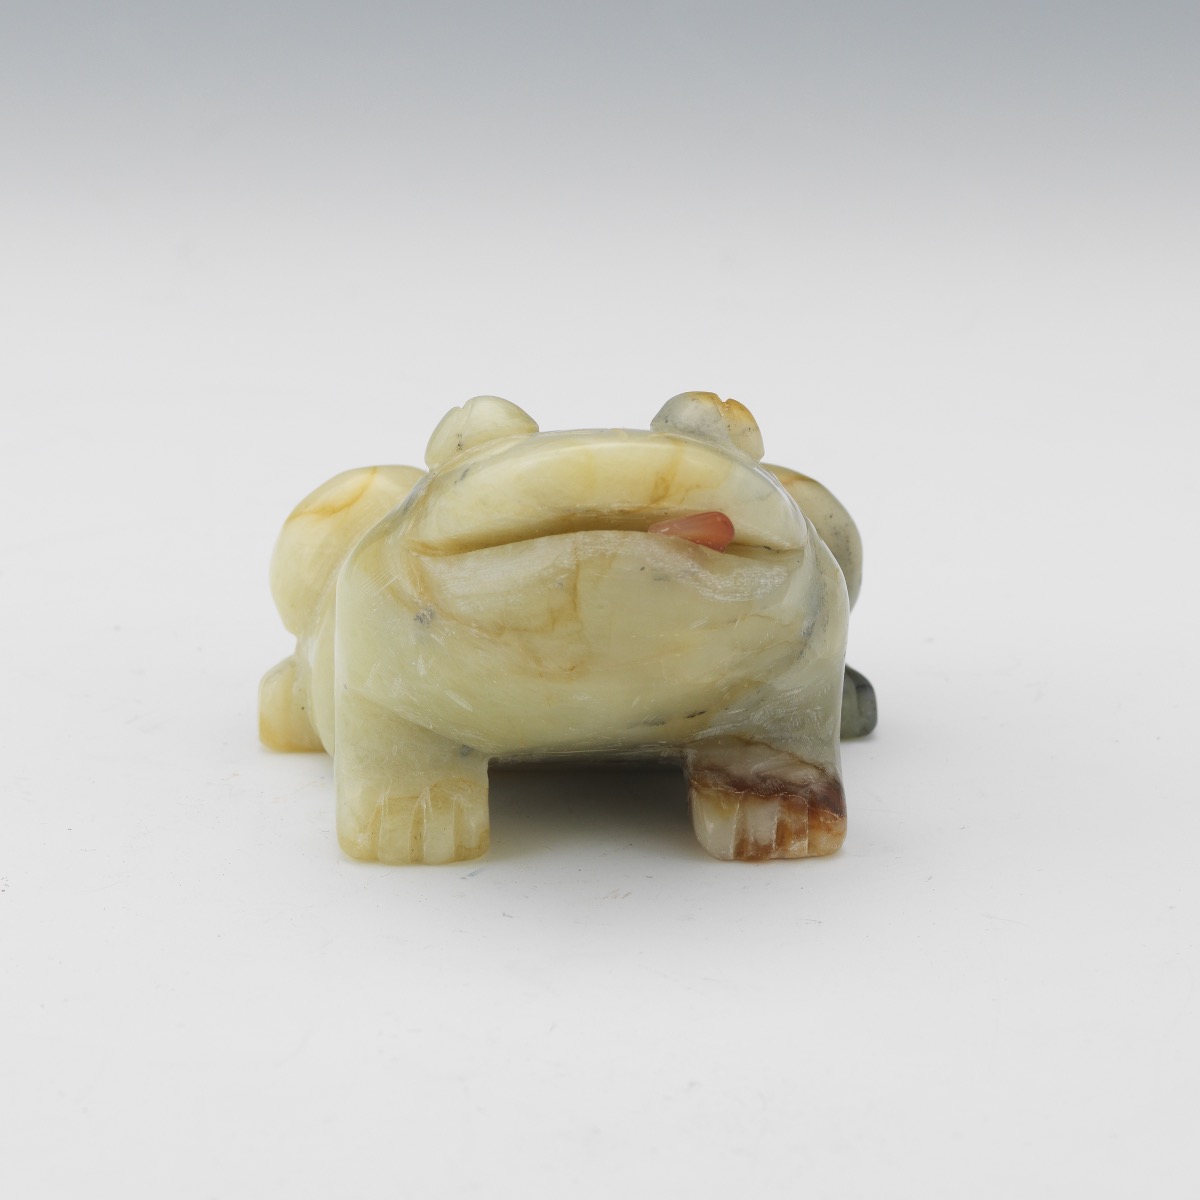 Chinese Carved Agate and Carnelian Lucky Frog Cabinet Sculpture, in Presentation Box - Image 5 of 8